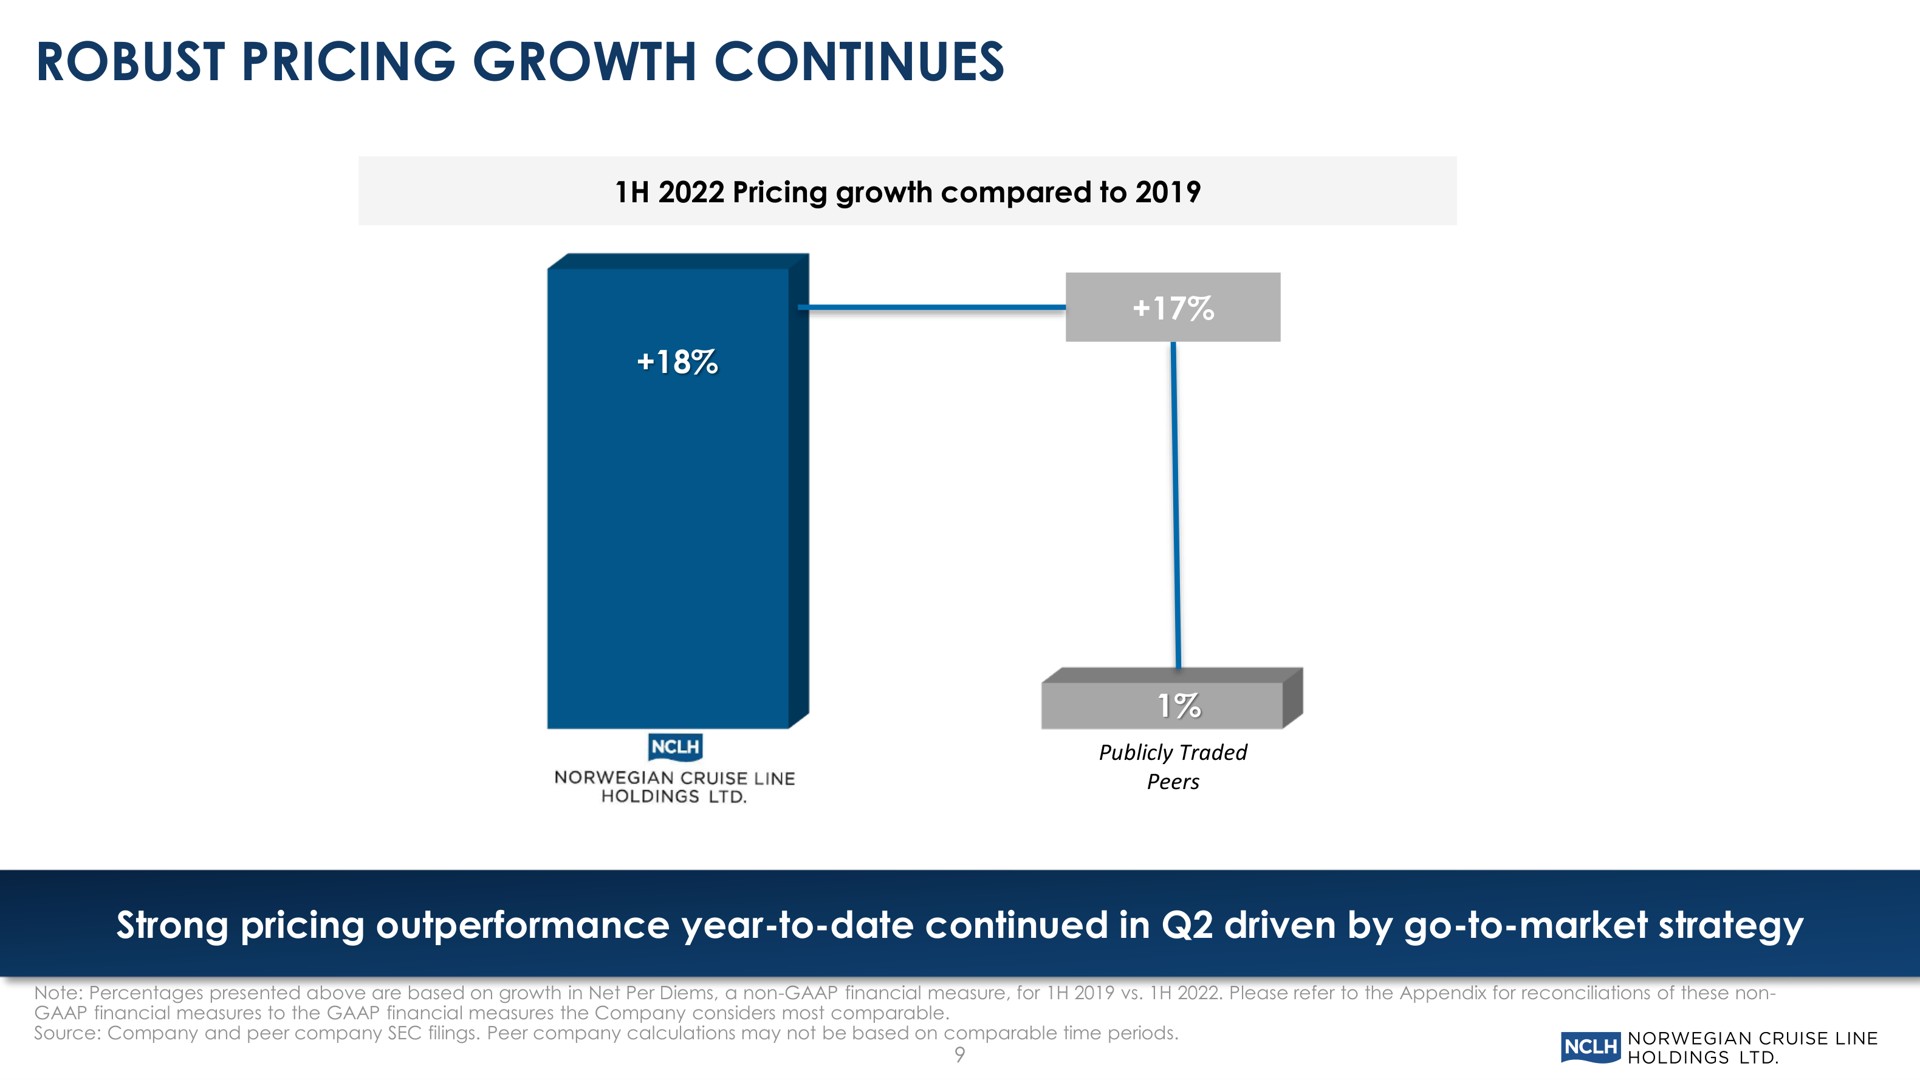 robust pricing growth continues strong pricing year to date continued in driven by go to market strategy | Norwegian Cruise Line